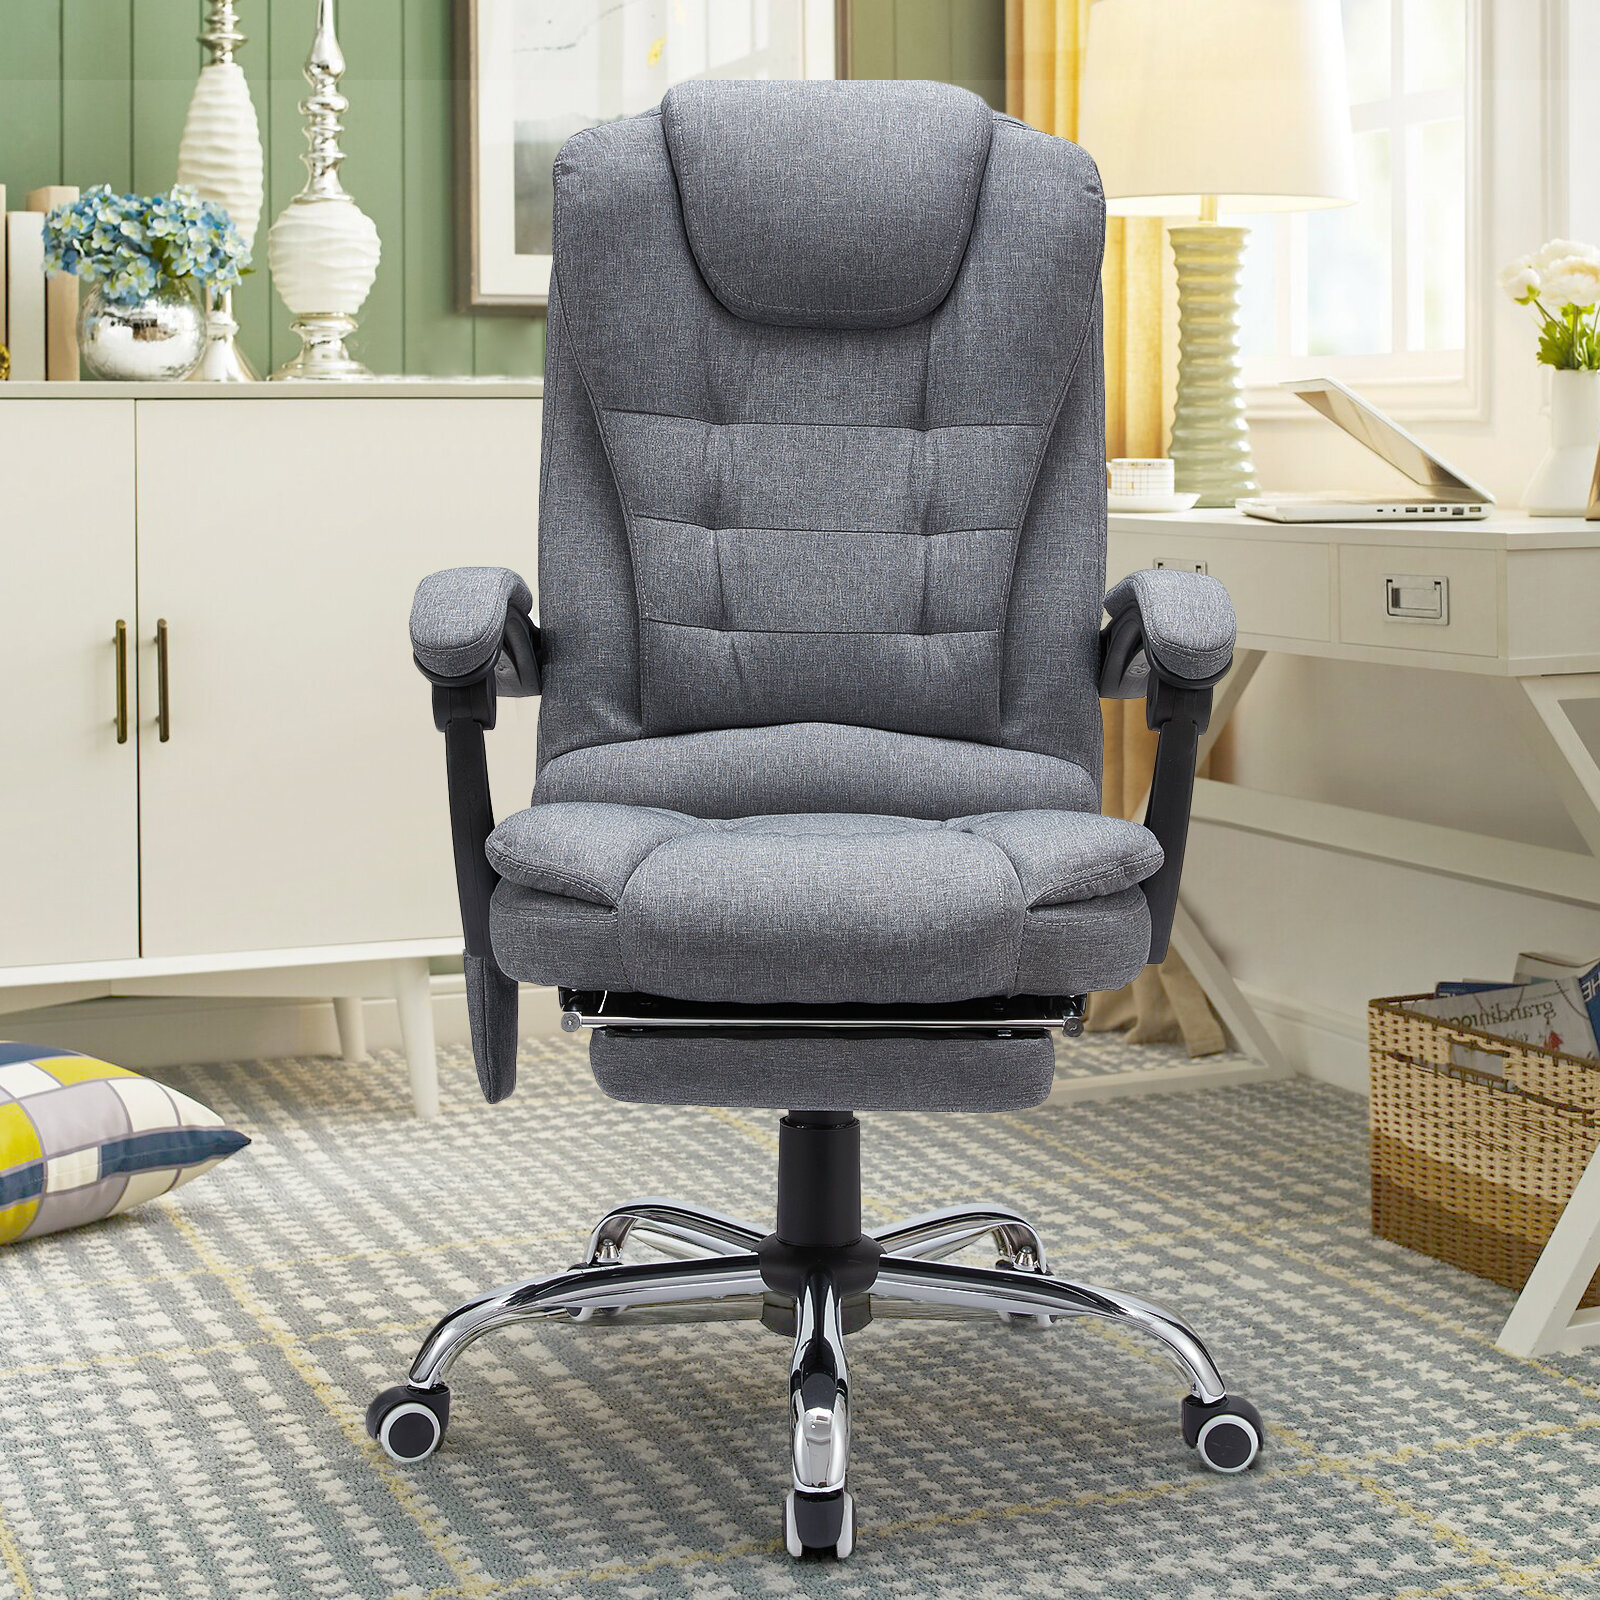 Nola Ergonomic Heated Massage Executive Chair The Twillery Co. Upholstery Color: Gray